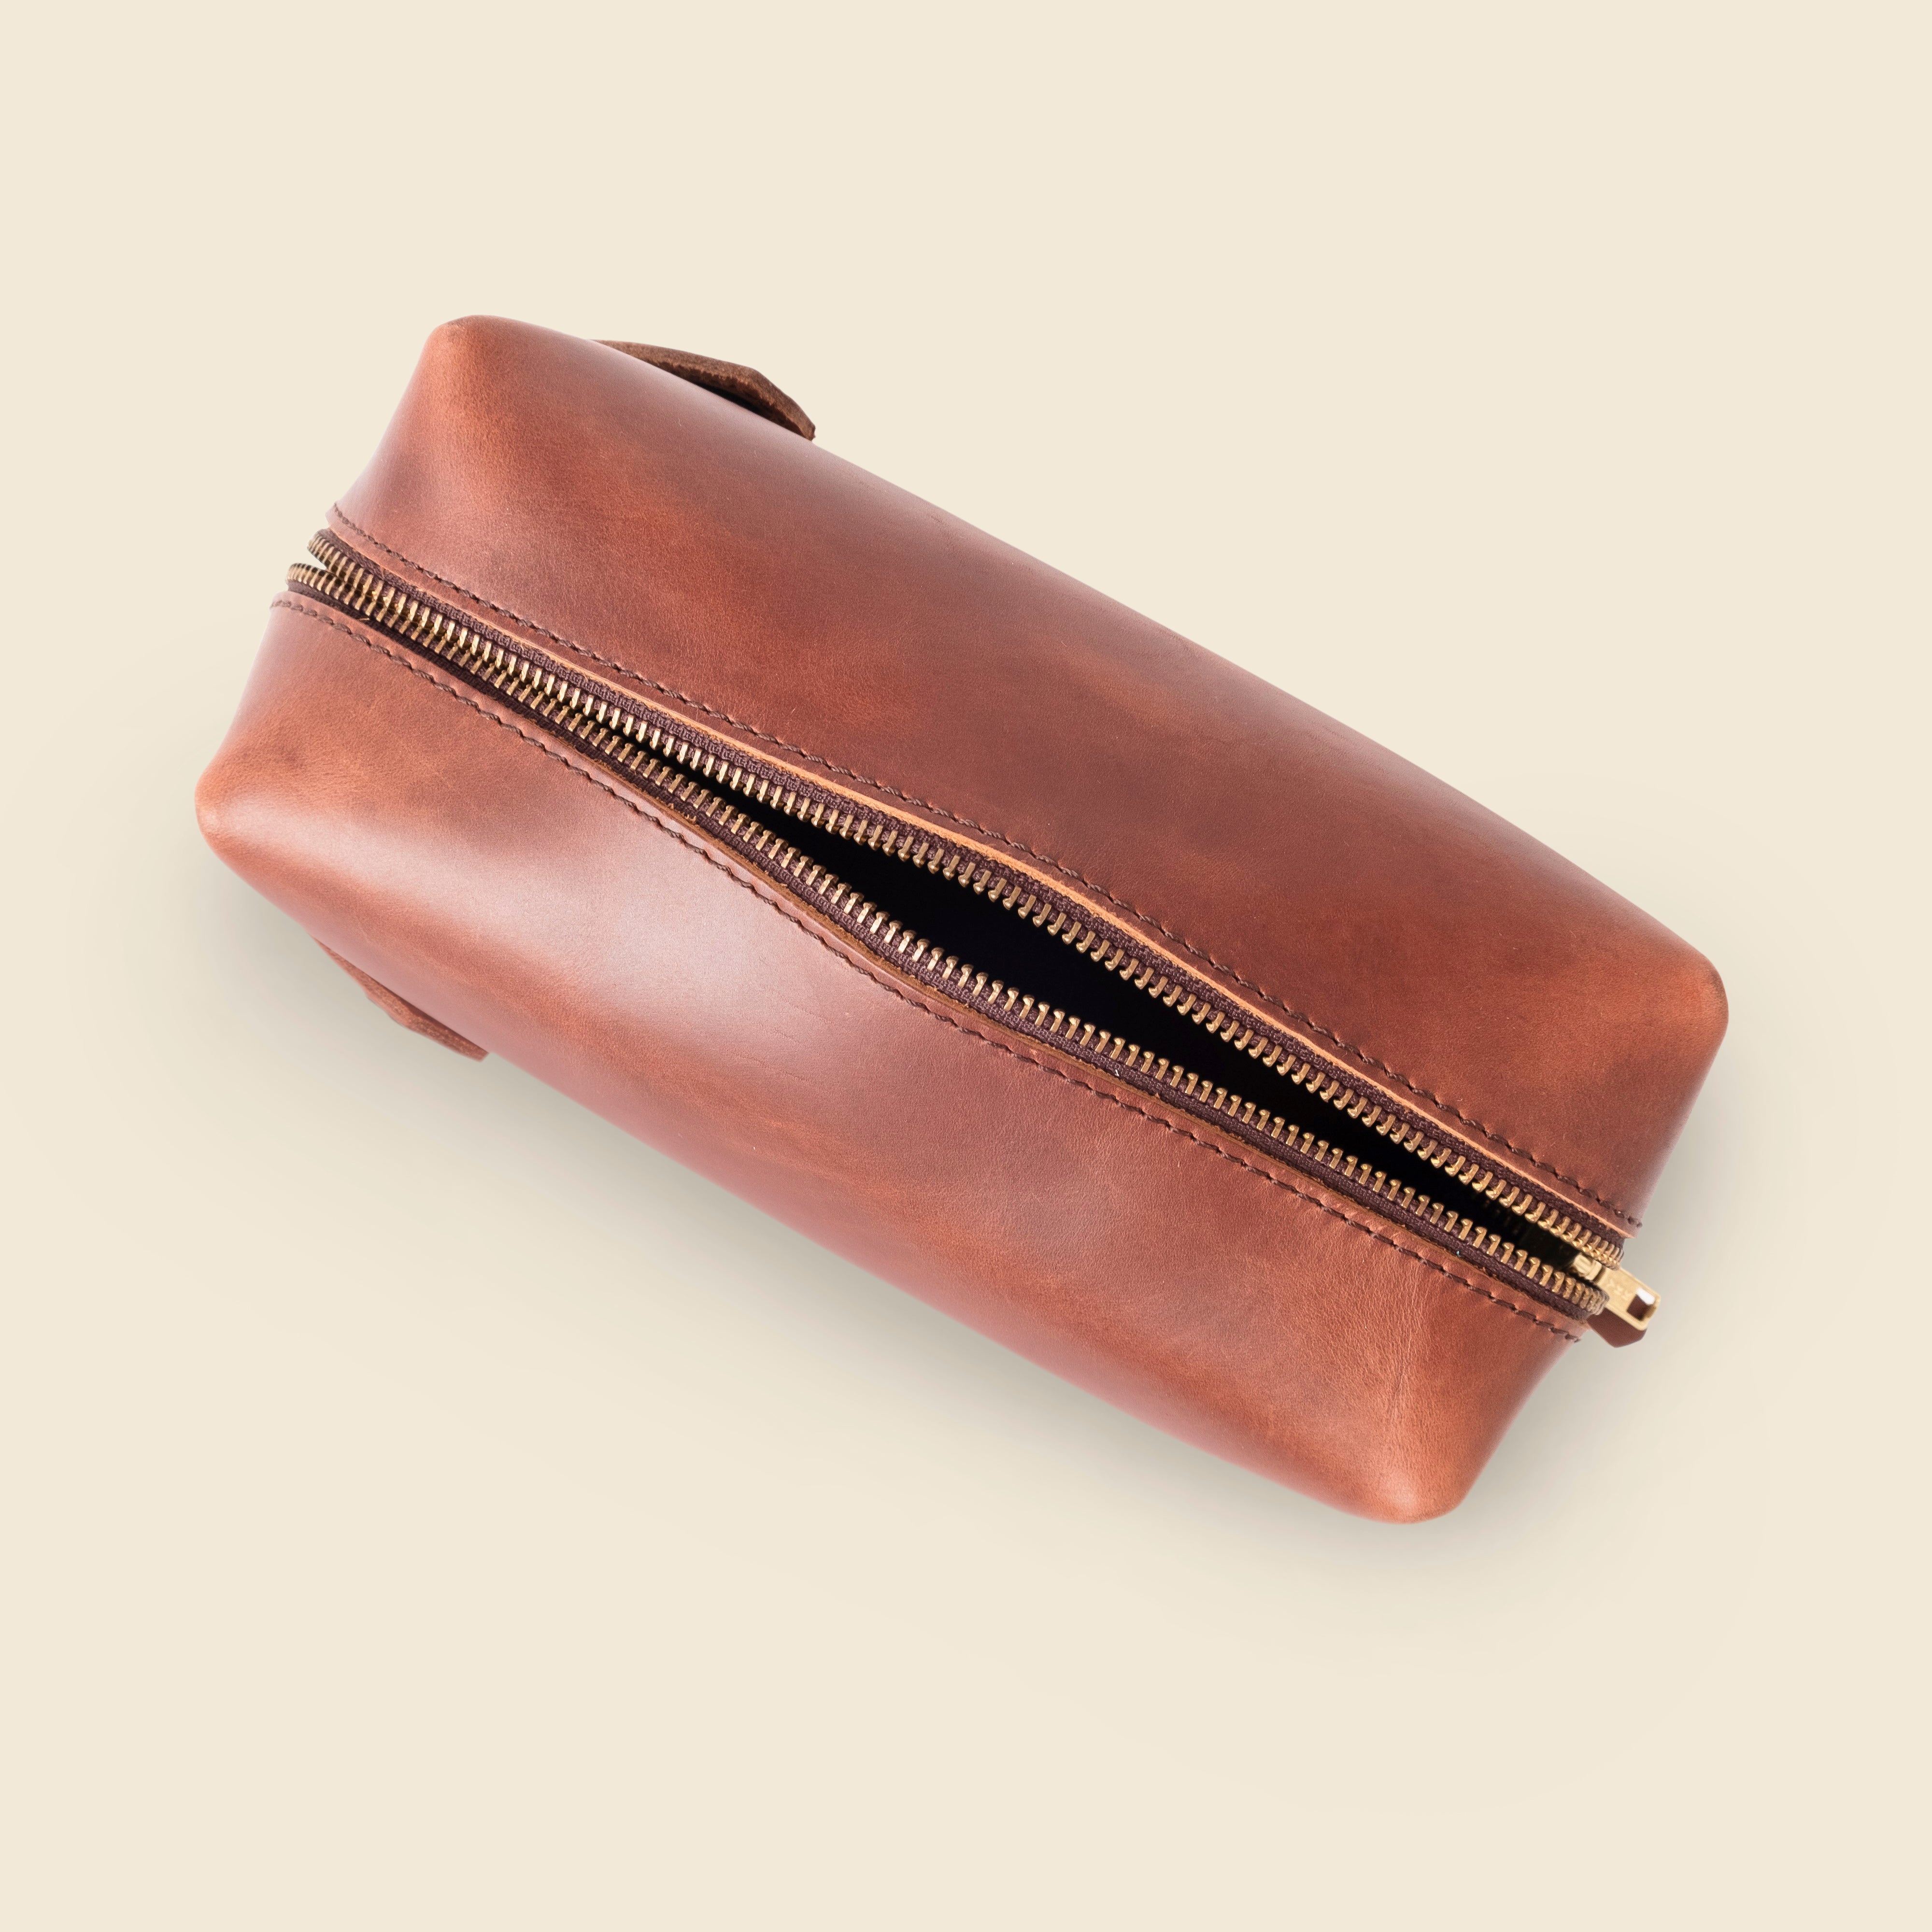 rustico leather toiletry bag for corporate gifts